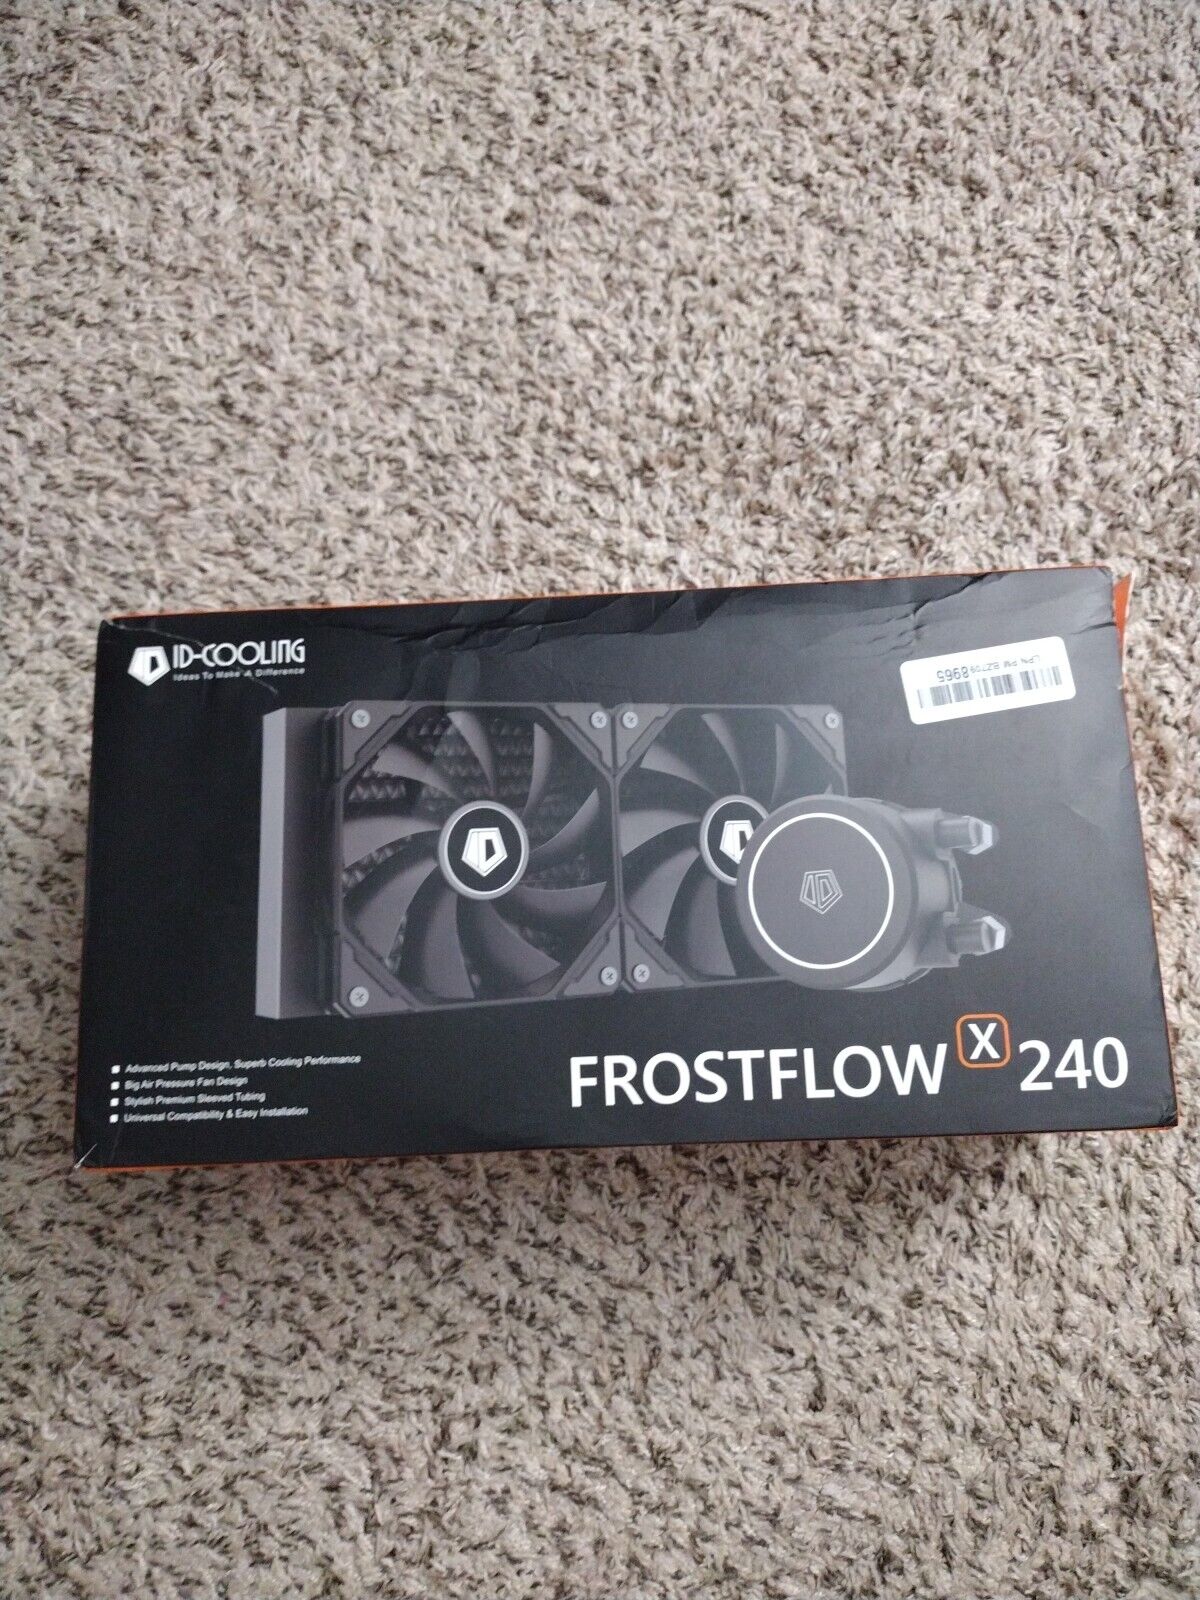 ID-COOLING Frostflow X240 CPU Water Cooler AIO Cooler